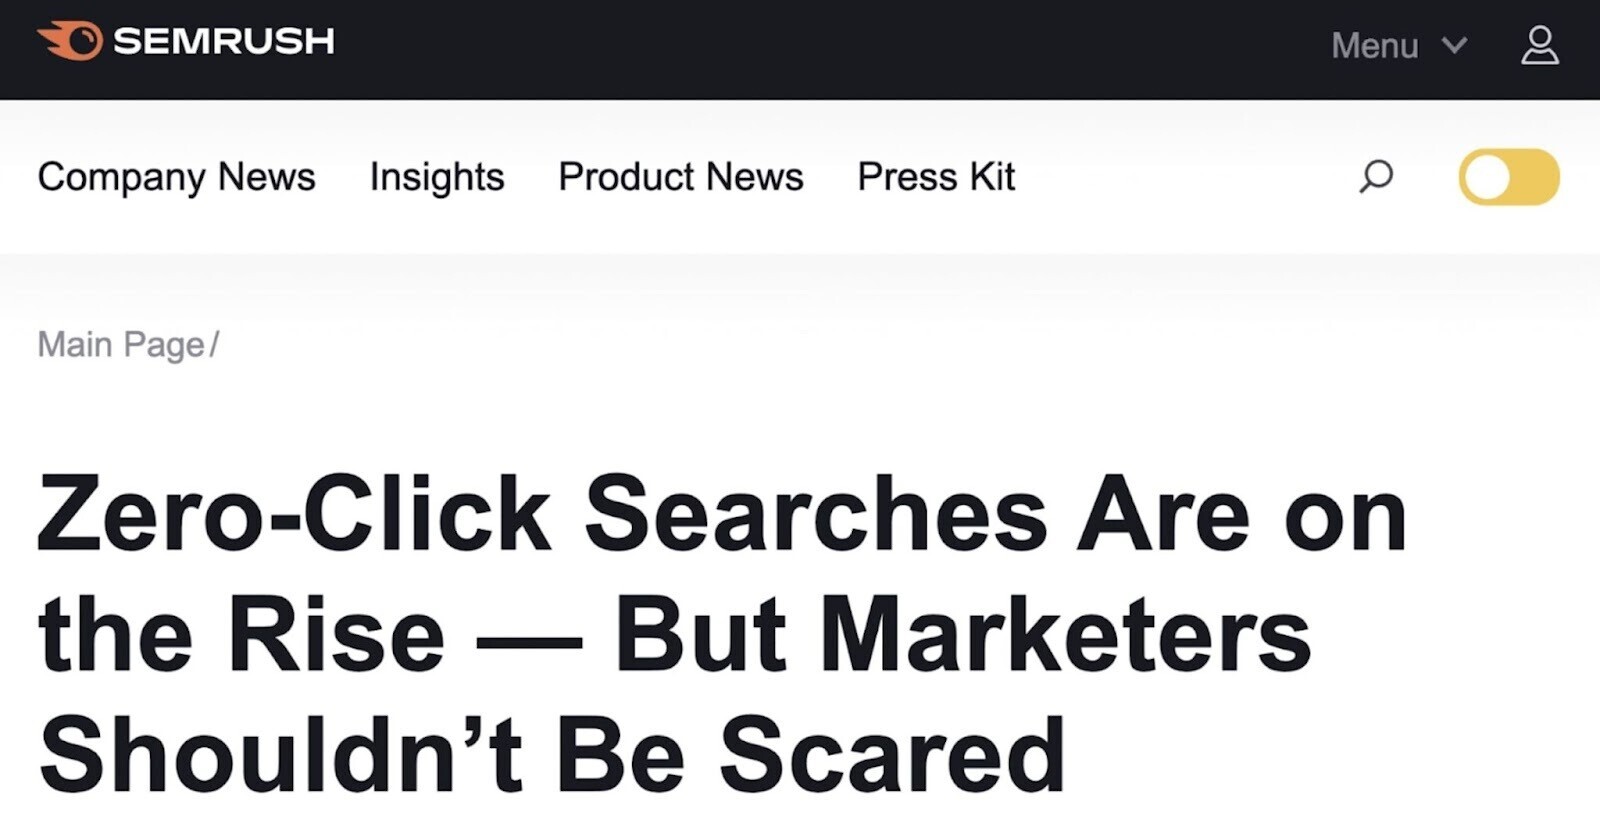 "Zero-Click Searches Are on the Rise—But Marketers Shouldn’t Be Scared" news title